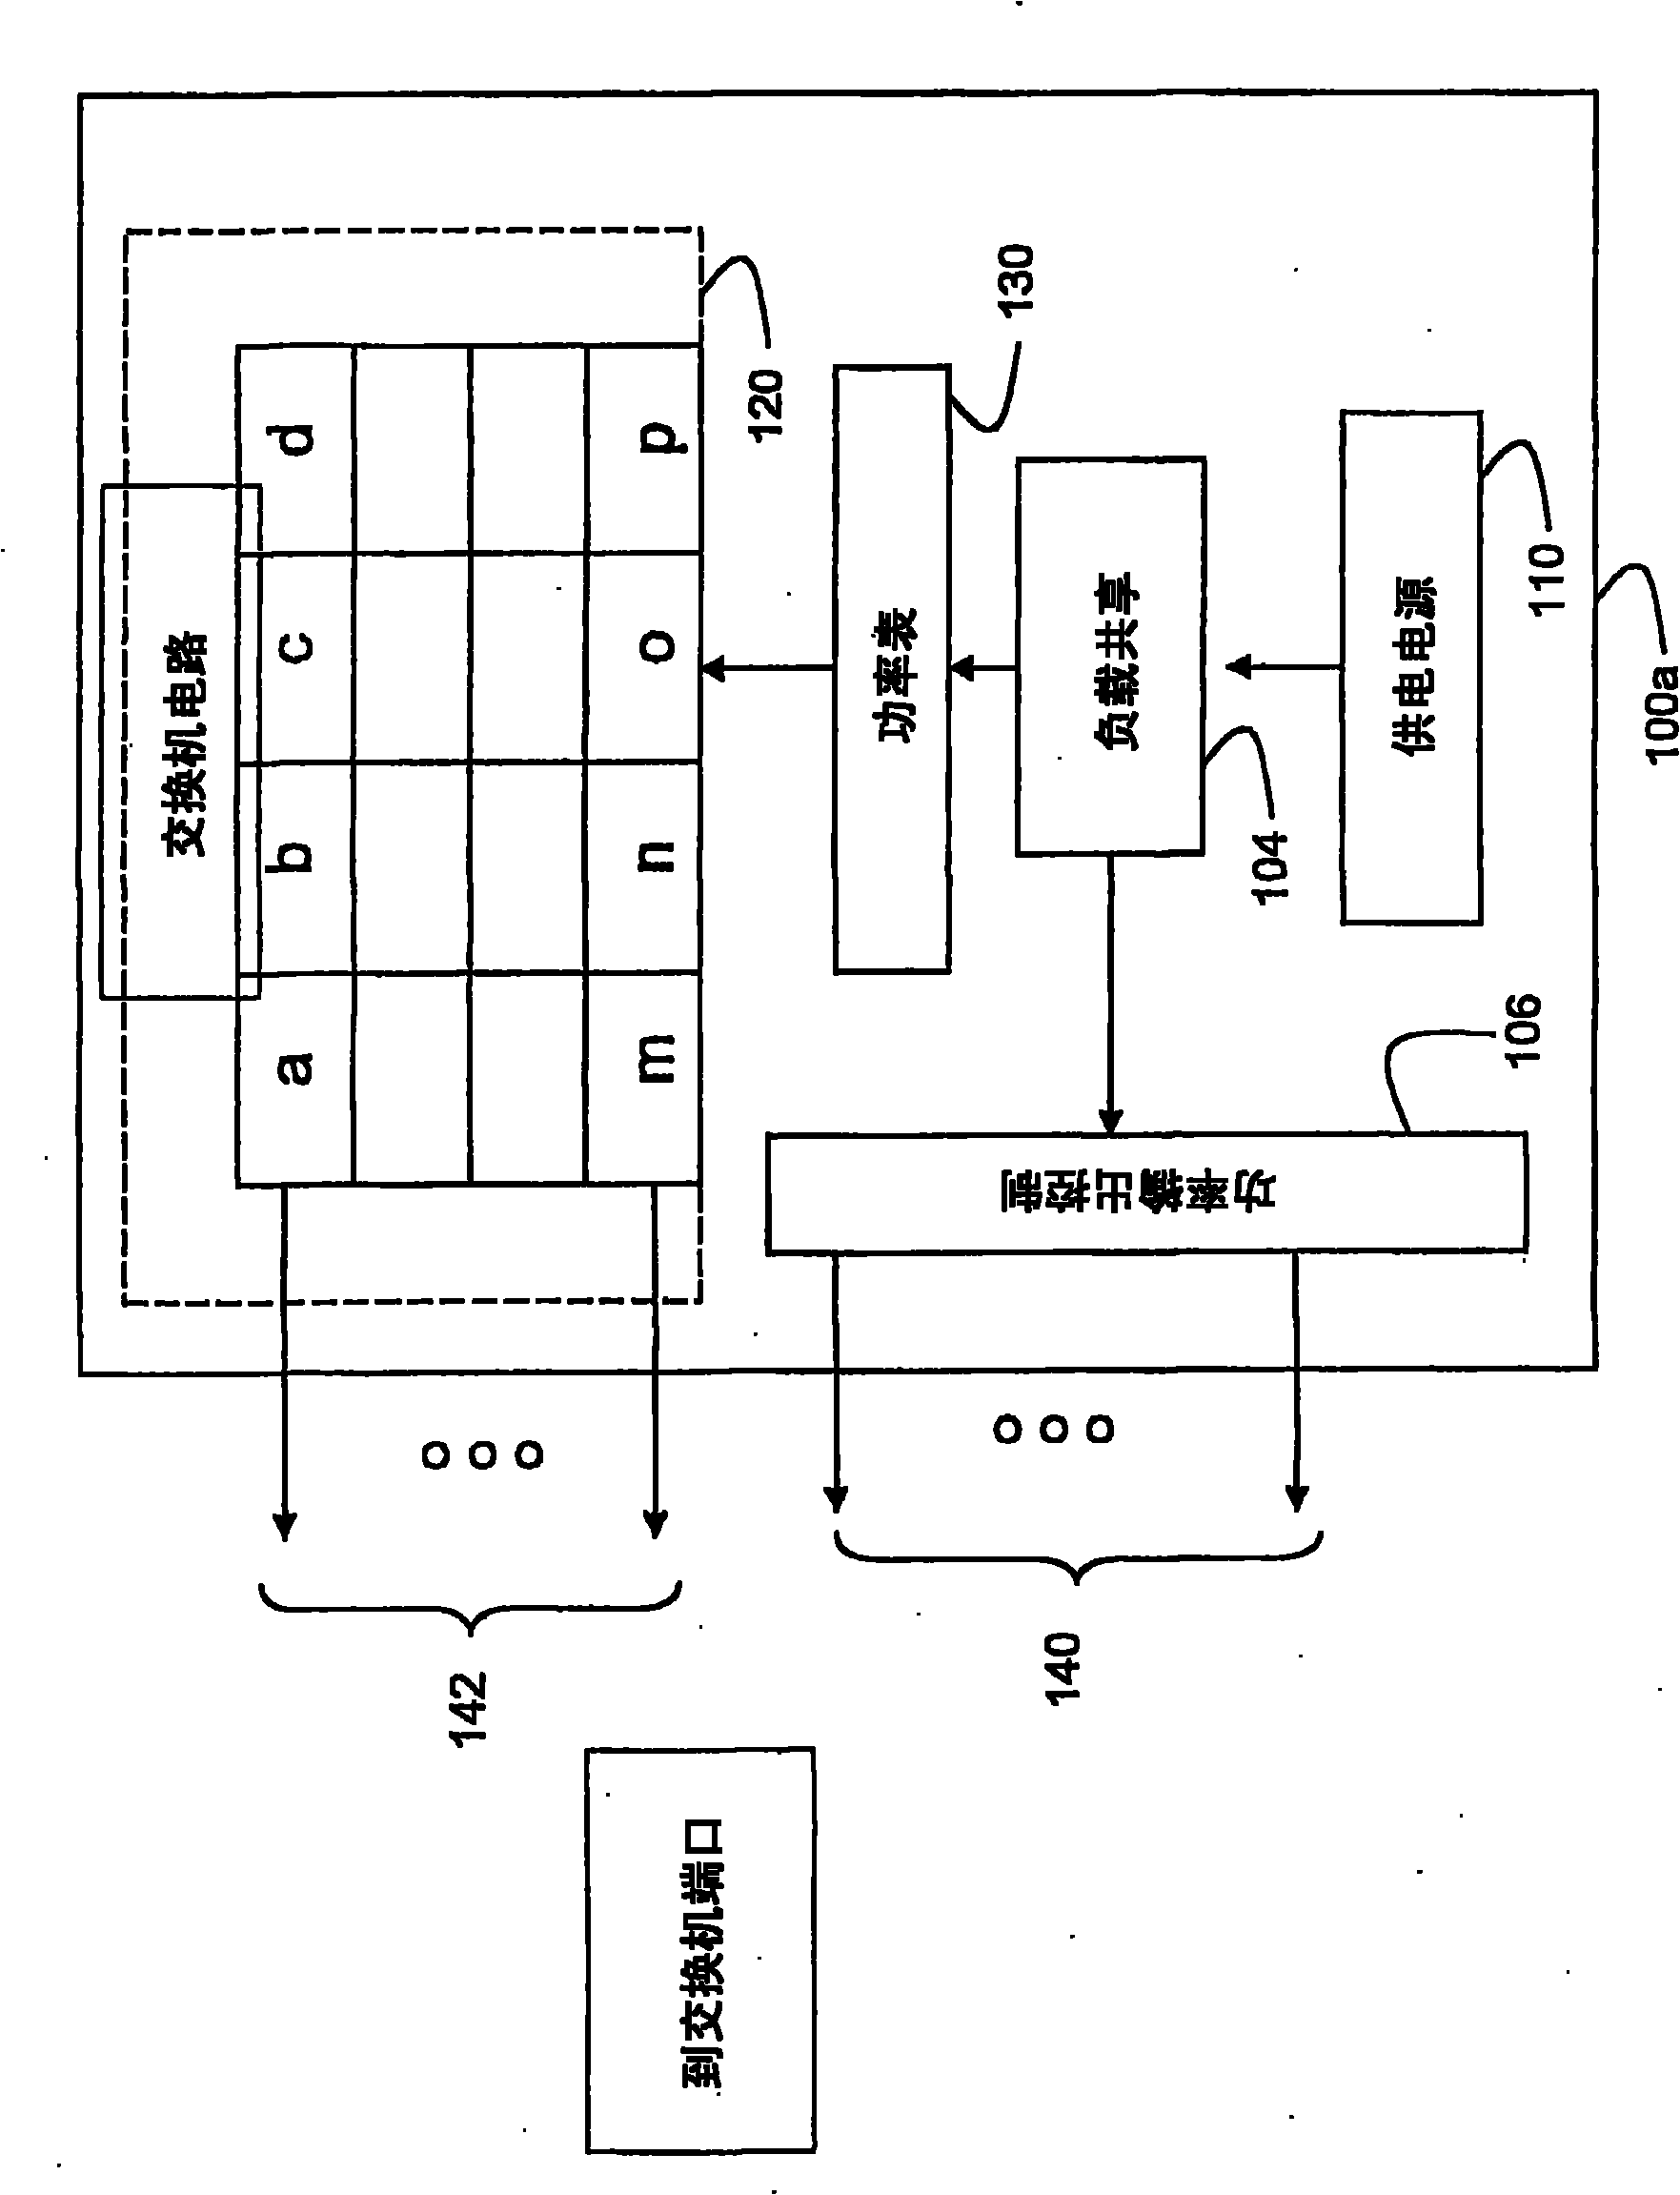 Intelligent power management of an intermediate network device switching circuitry and poe delivery